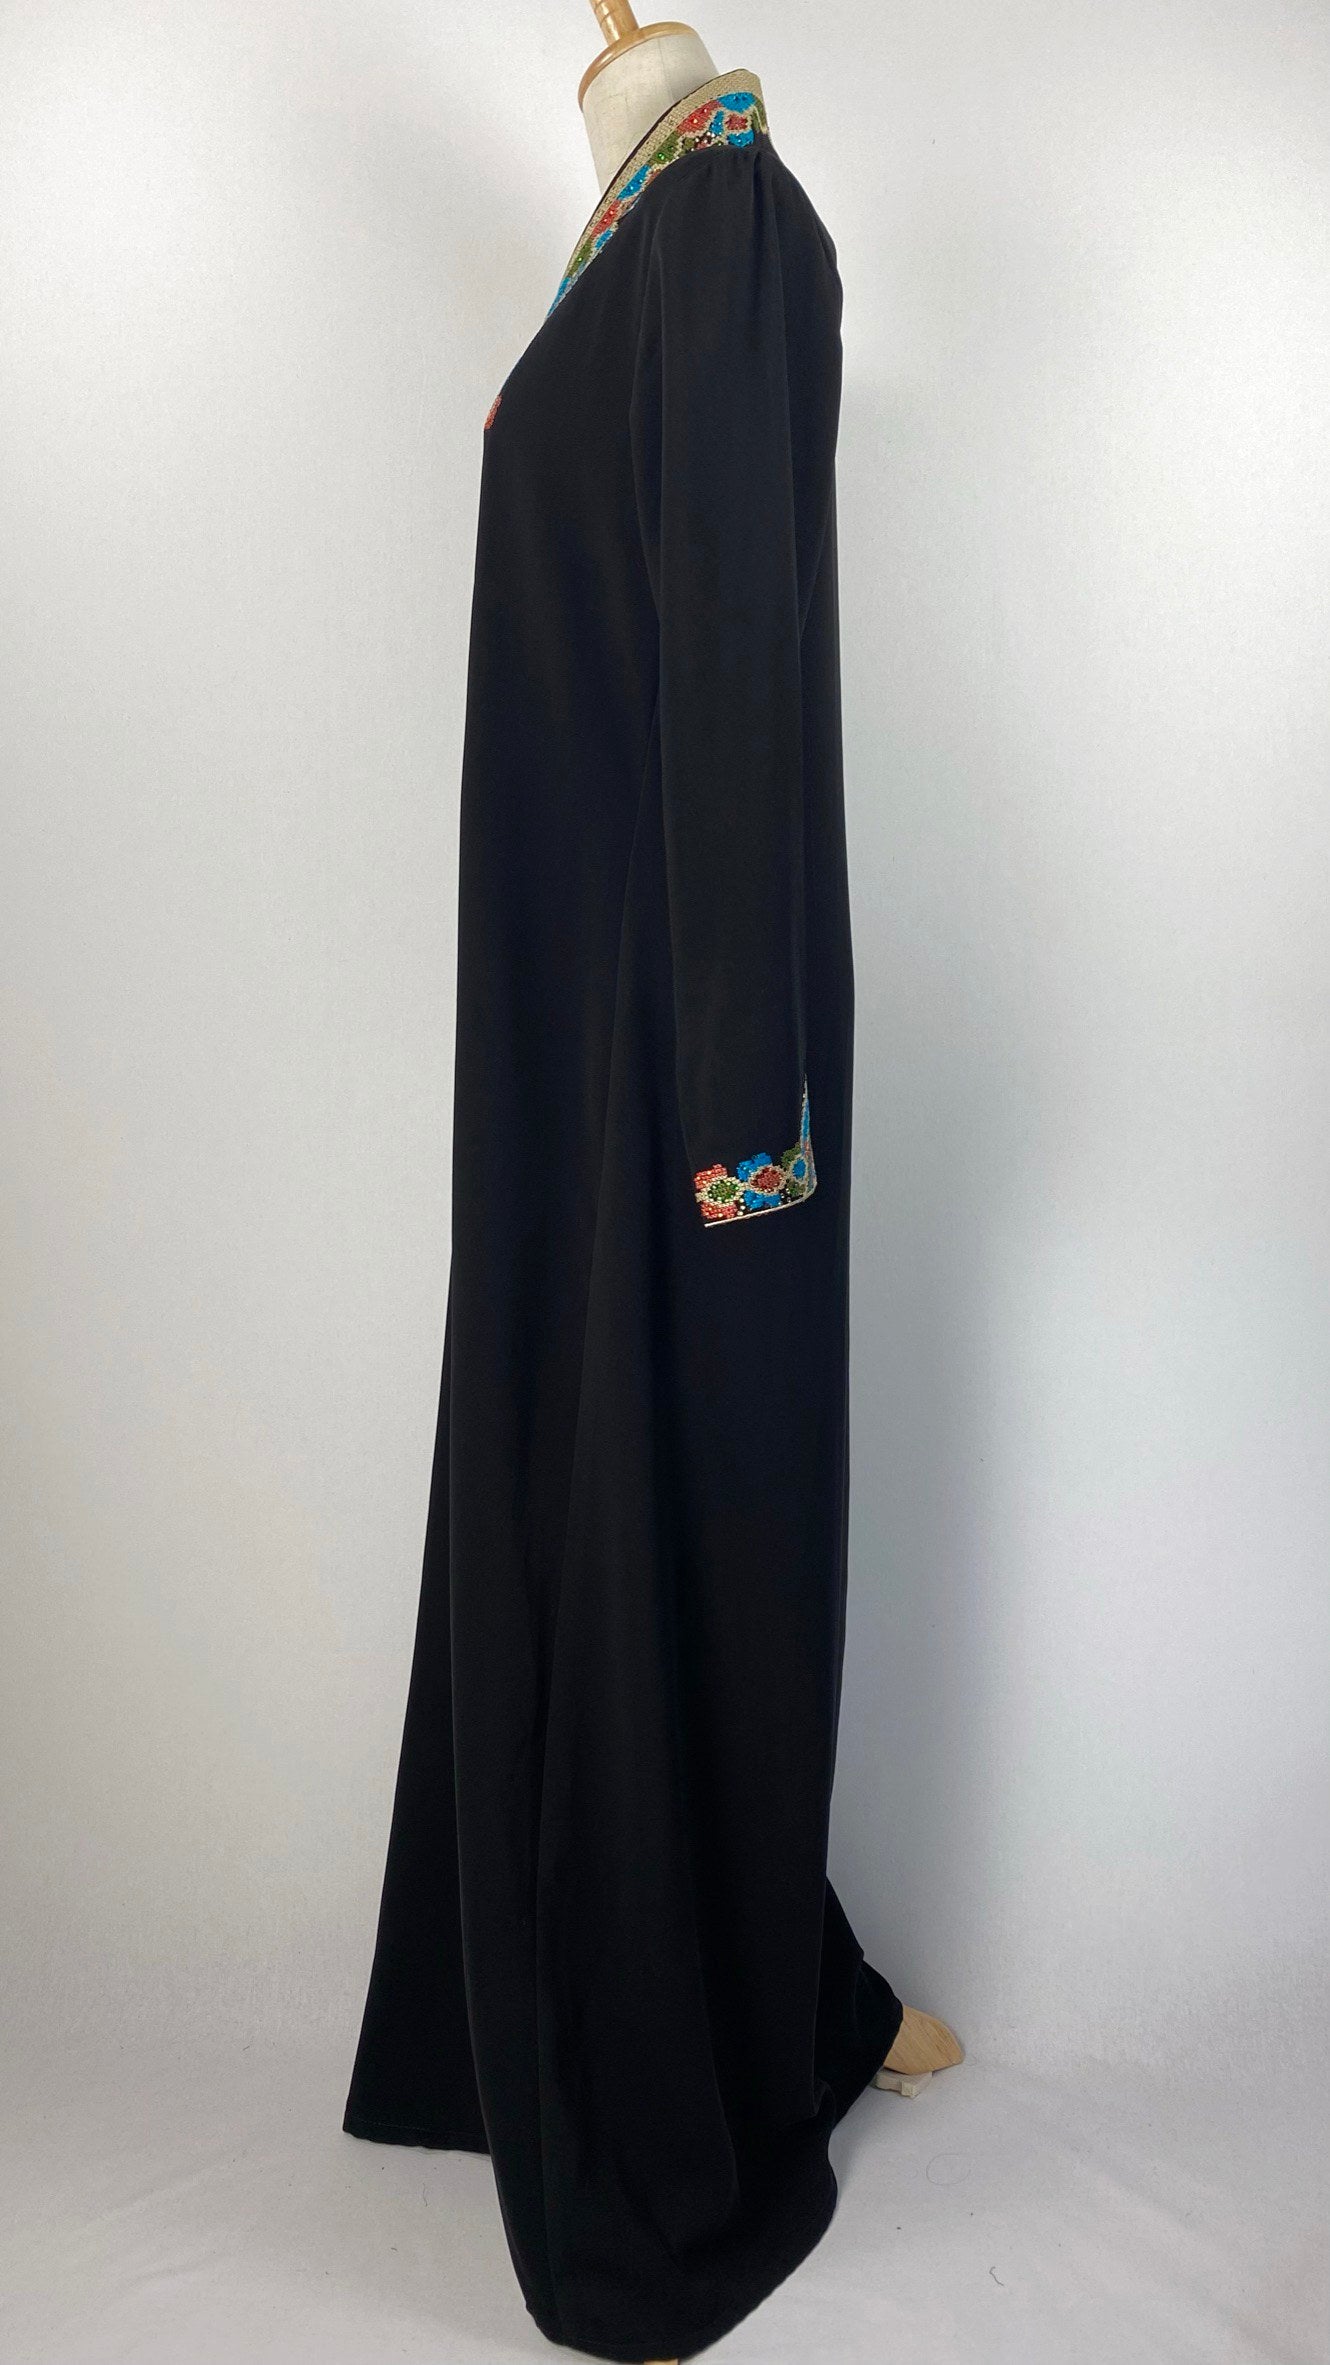 Long Sleeve Zip Up Abaya with Colorful Embroidery, Black